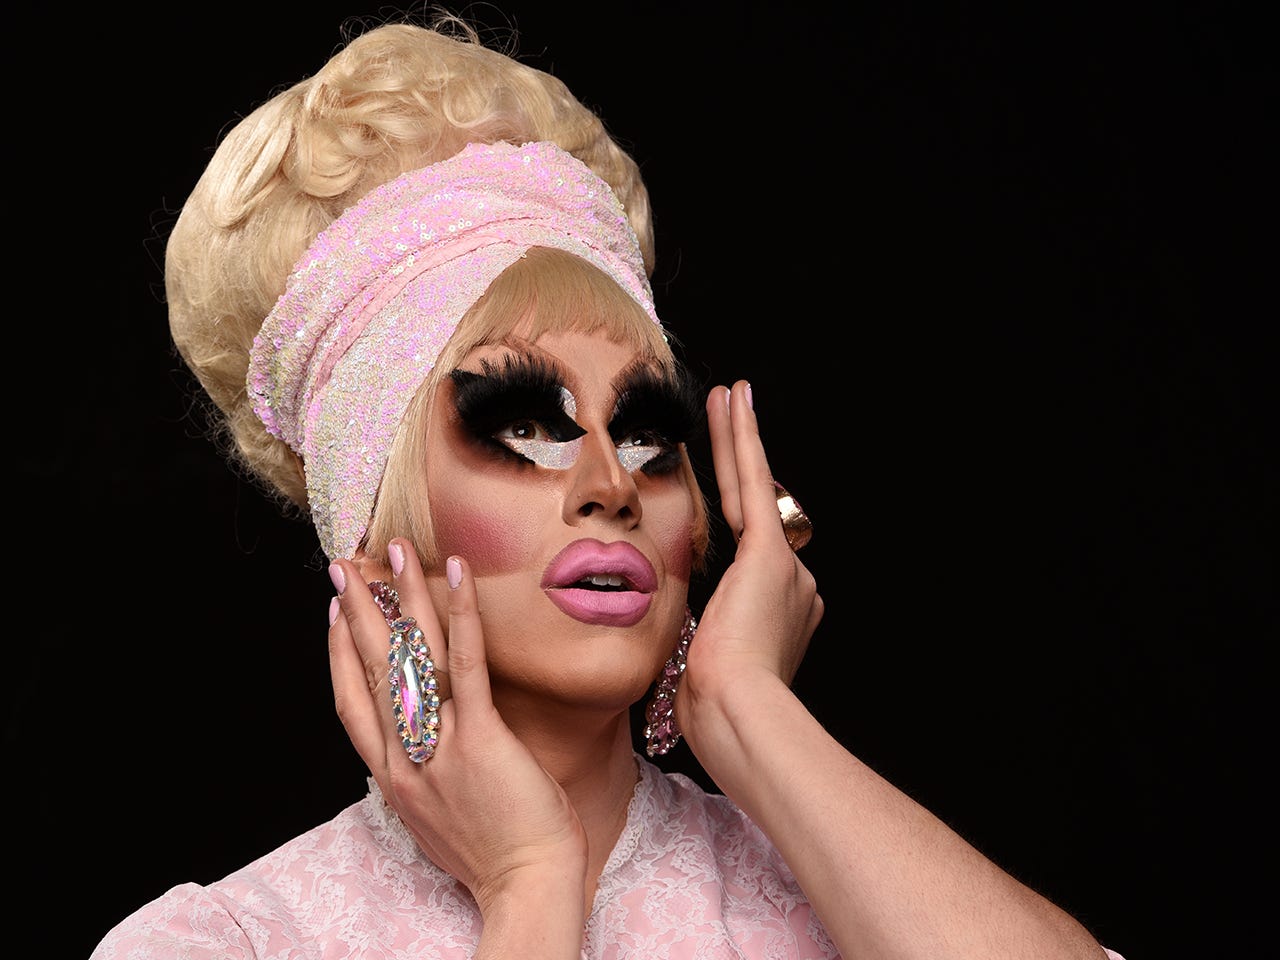 Trixie Mattel Of Rupauls Drag Race On Country Music Gender Norms 7644